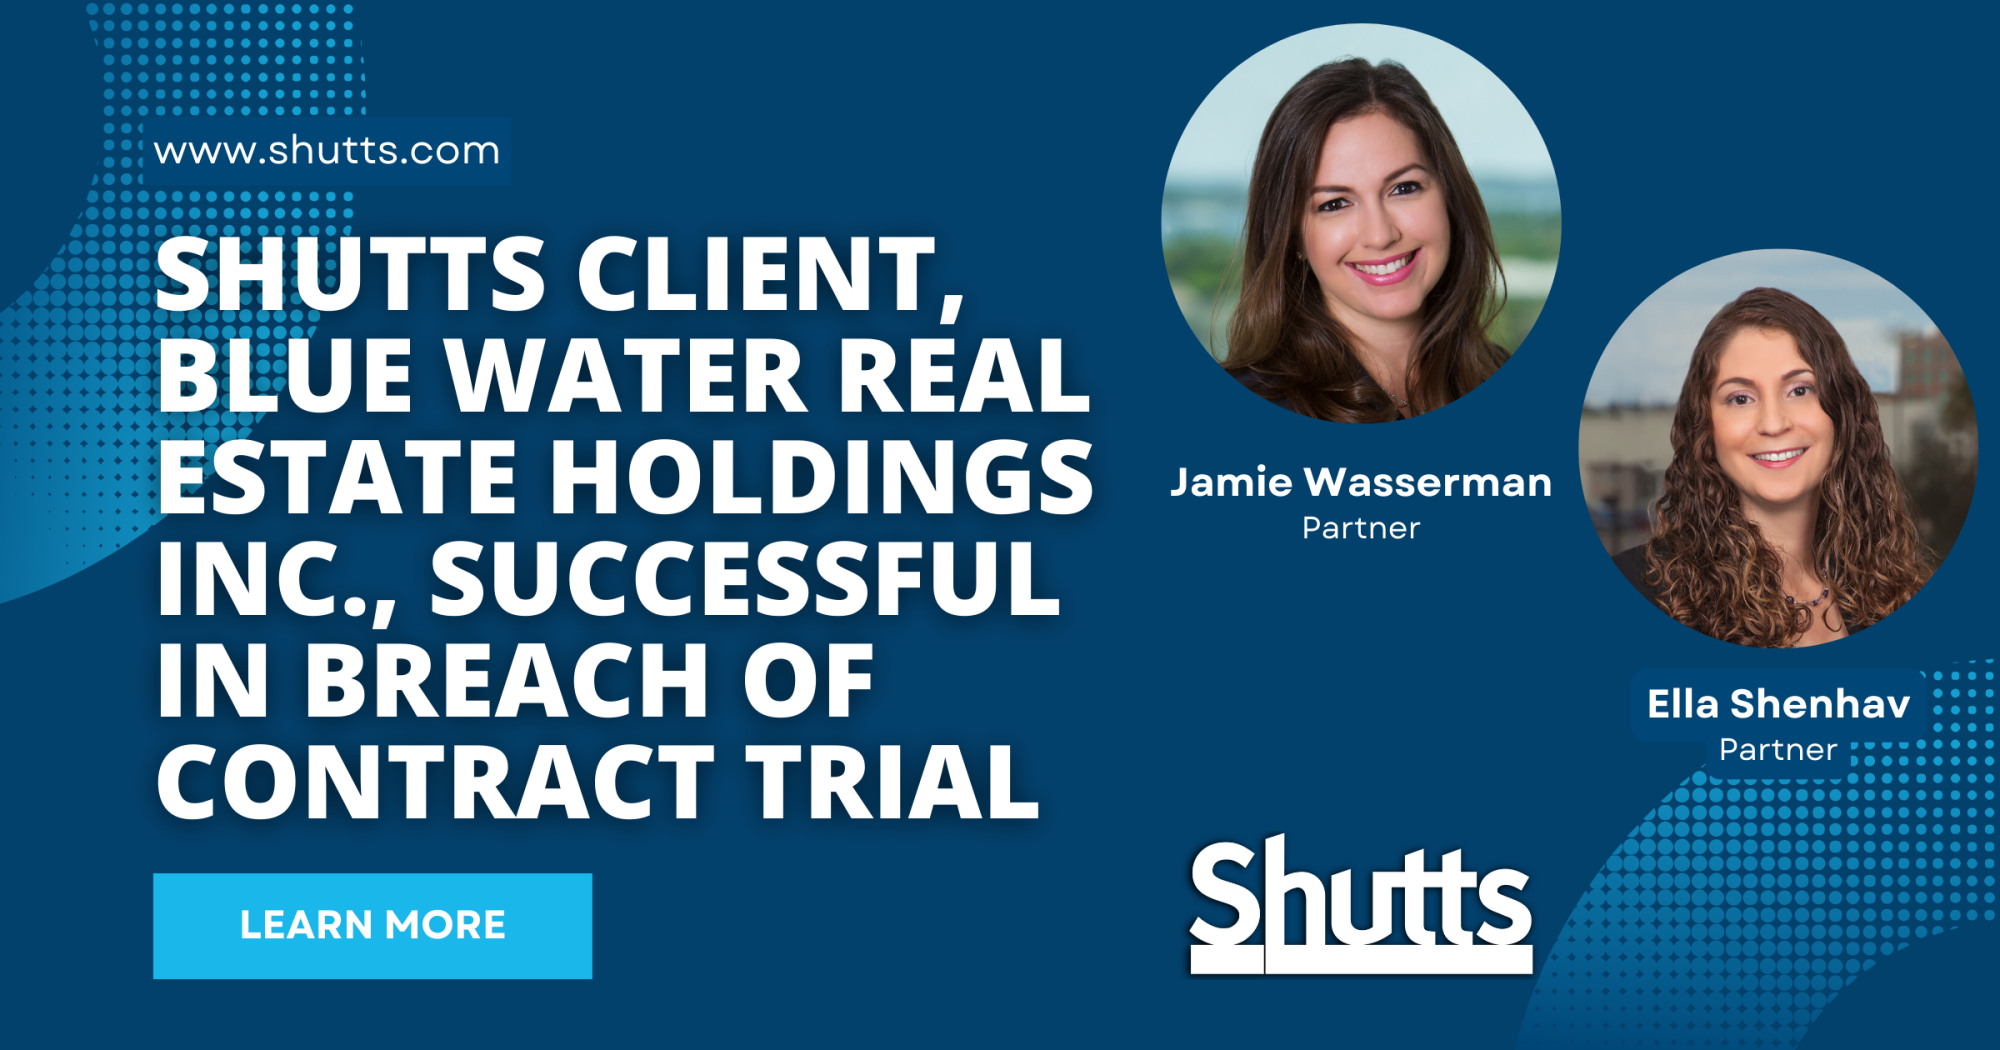 Shutts Client, Blue Water Real Estate Holdings Inc., Successful in Breach of Contract Trial